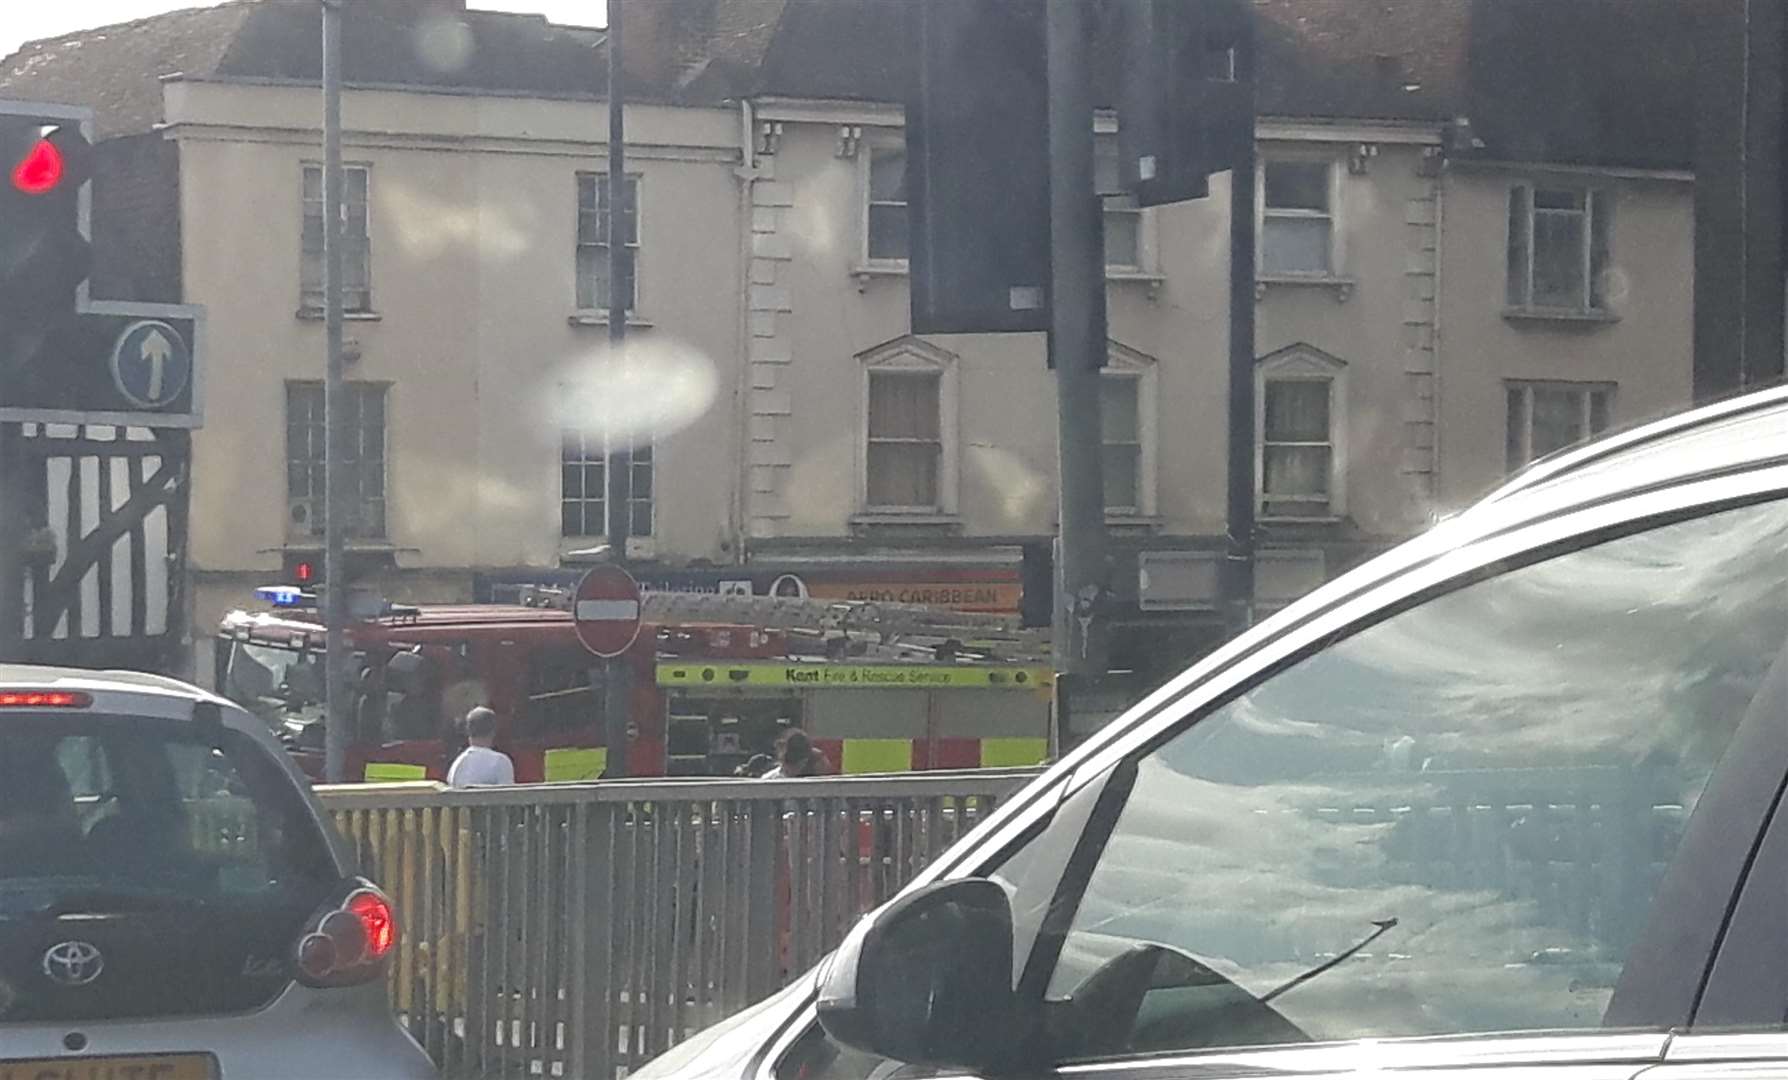 The fire in Lower Stone Street, Maidstone